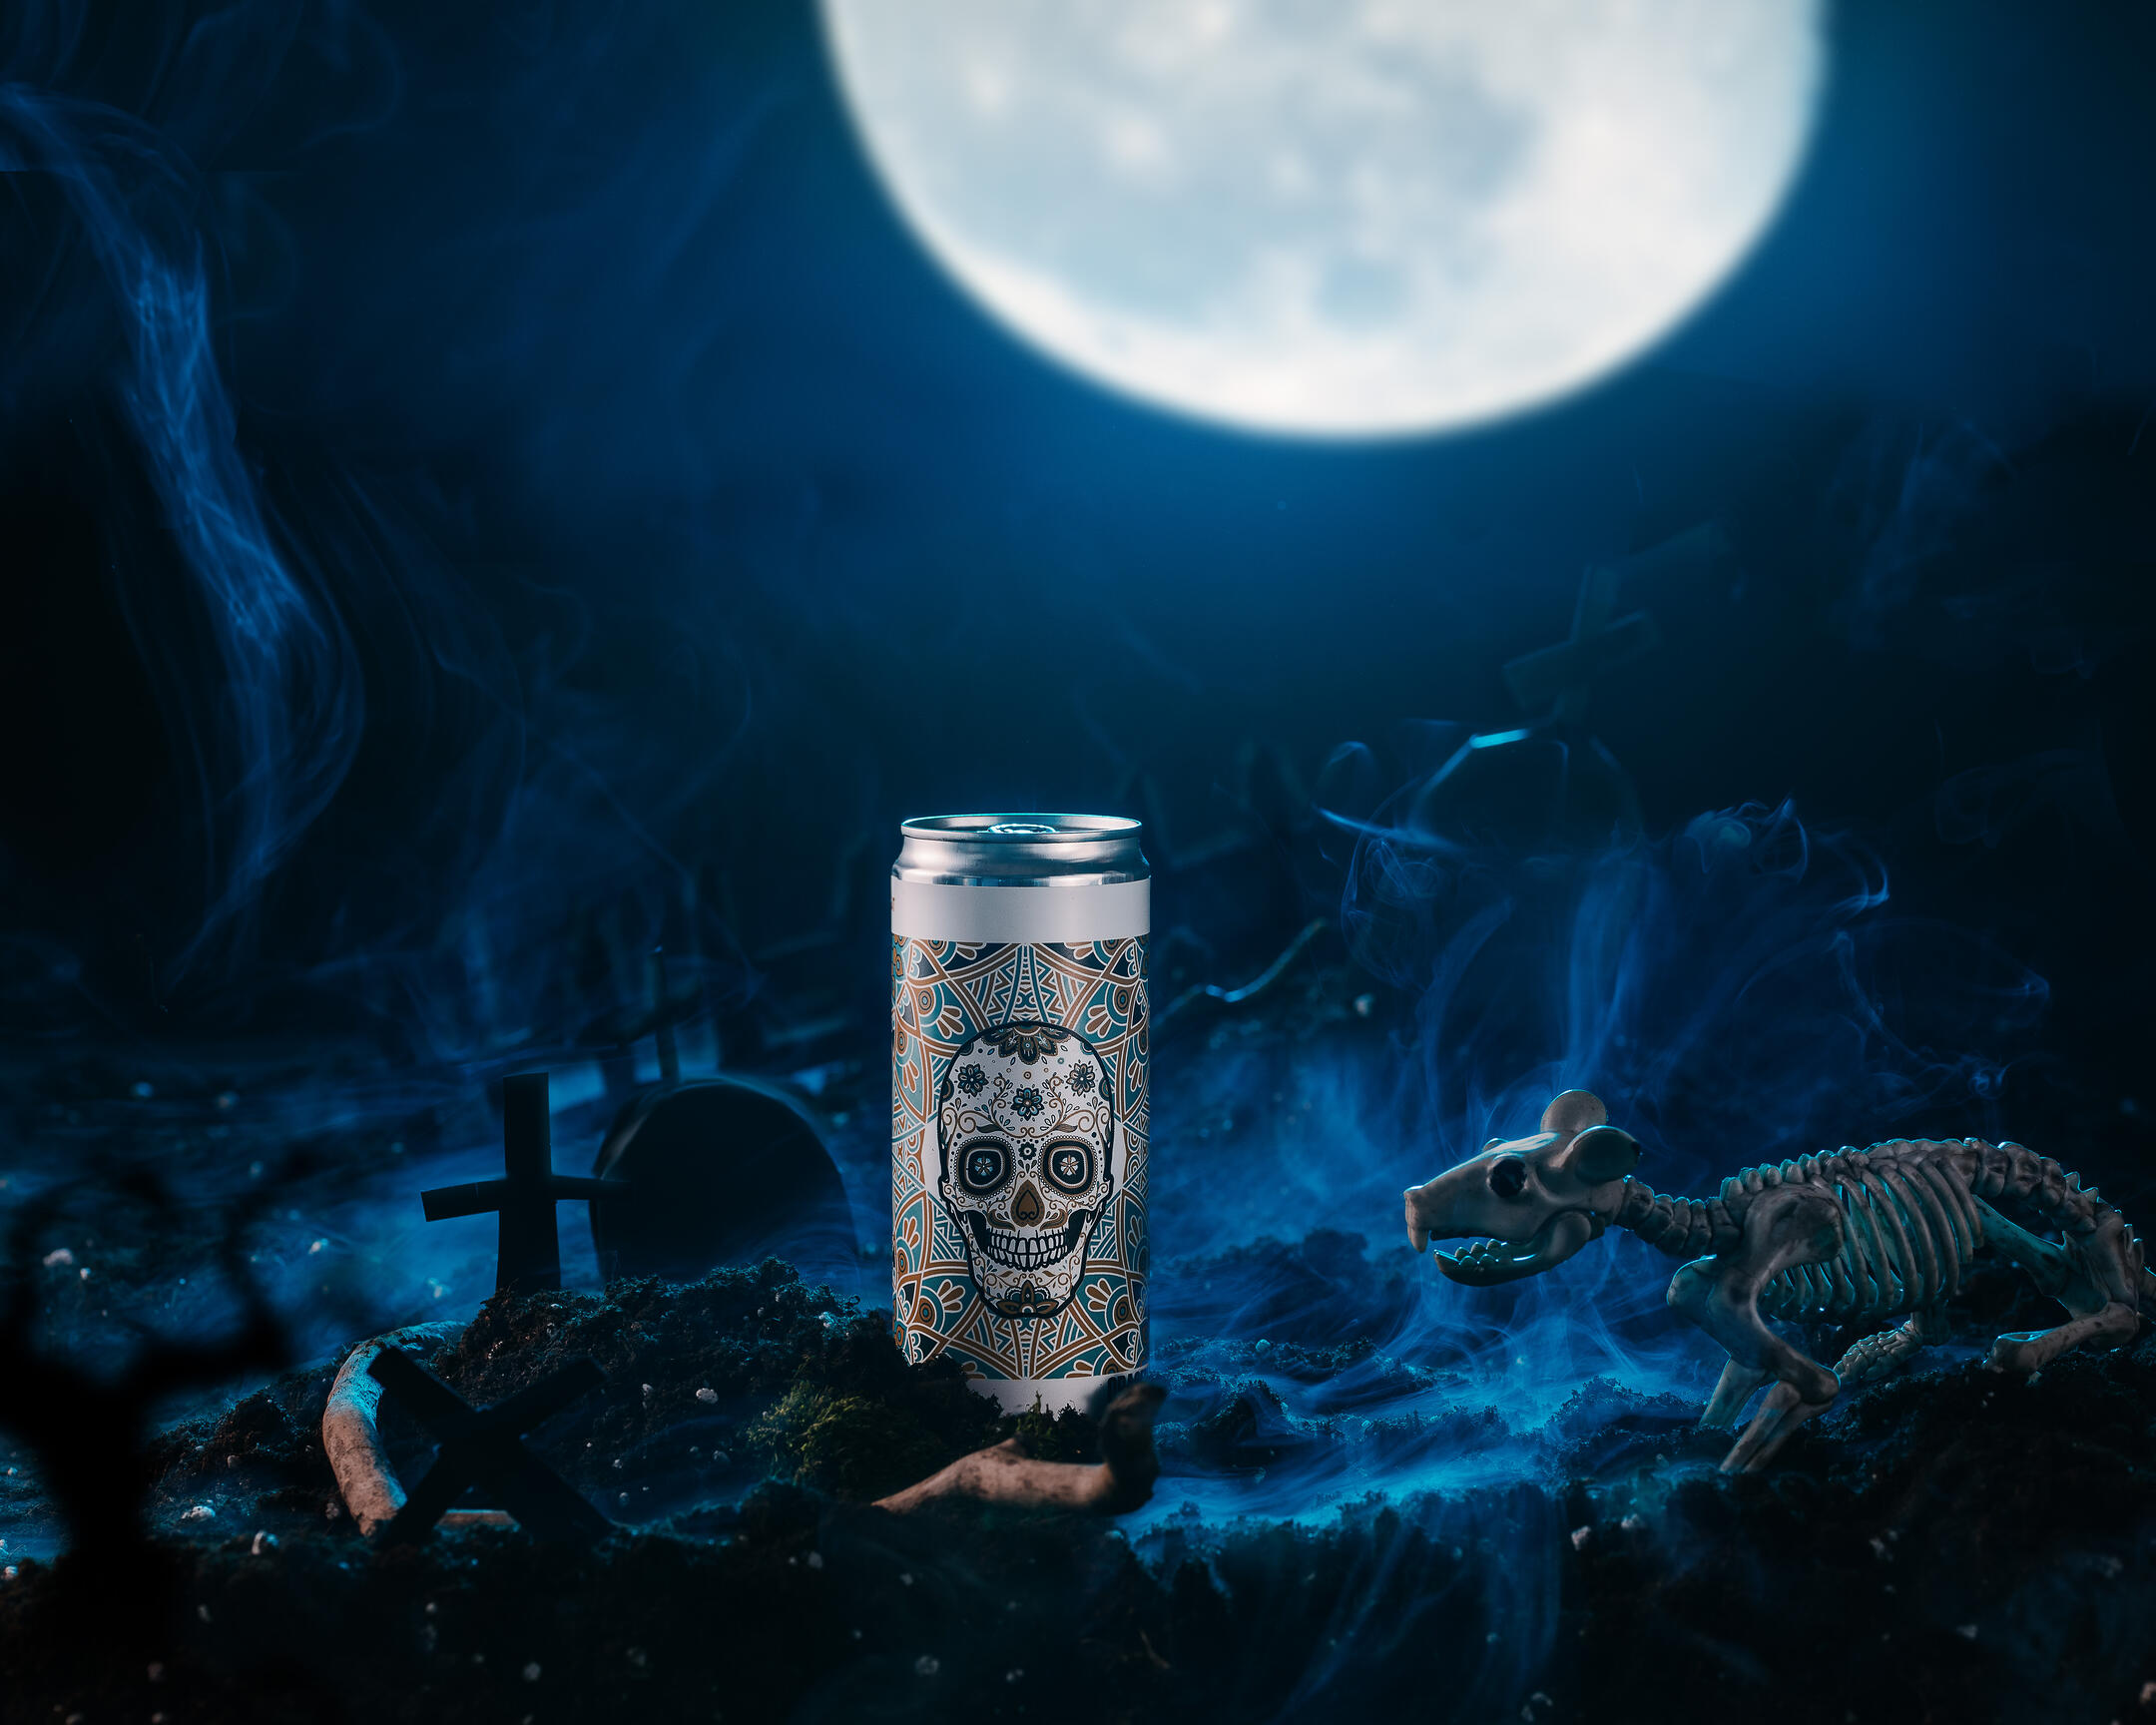  A Beer Bastard stands in the foreground in the light of the moon.  Landscape shot. A bottle of beer. Bastard stands in the foreground in the light of the moon. Judging by the ground around the bottle and the fog, events unfold in the cemetery at night. This conjecture is confirmed by the outlines of the graves in the background. The light of the moon illuminates the skeleton of a rat on the right - which is sneaking toward the bottle. Halloween ad shot